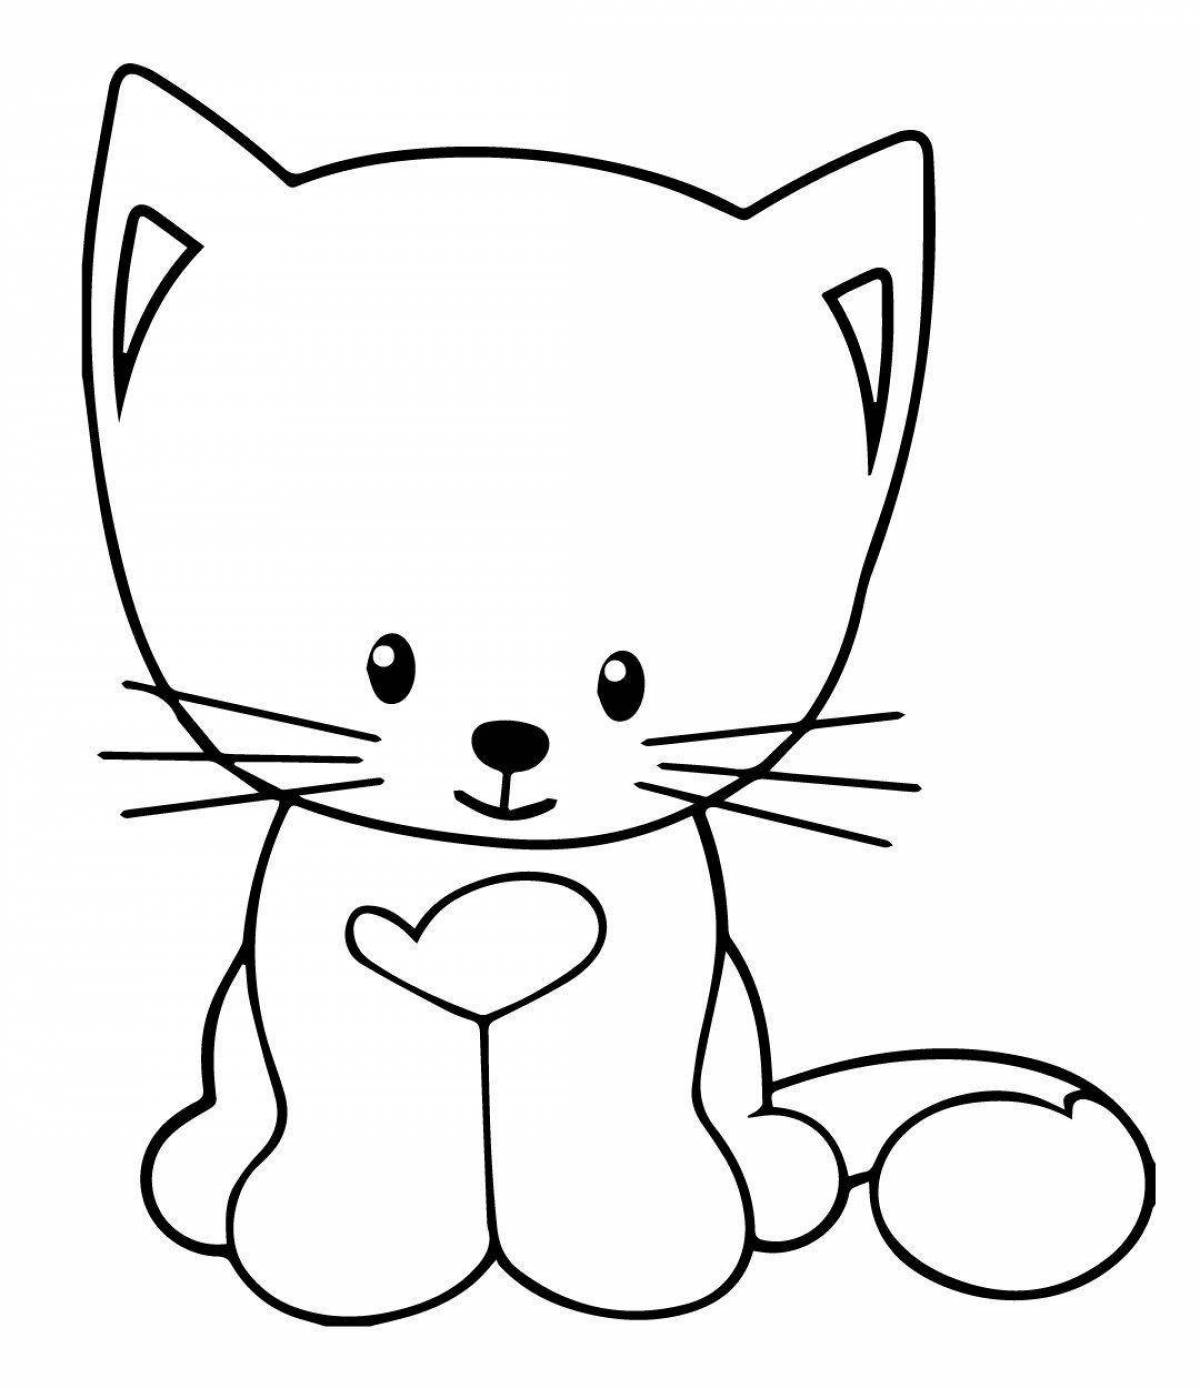 Coloring book witty kitten